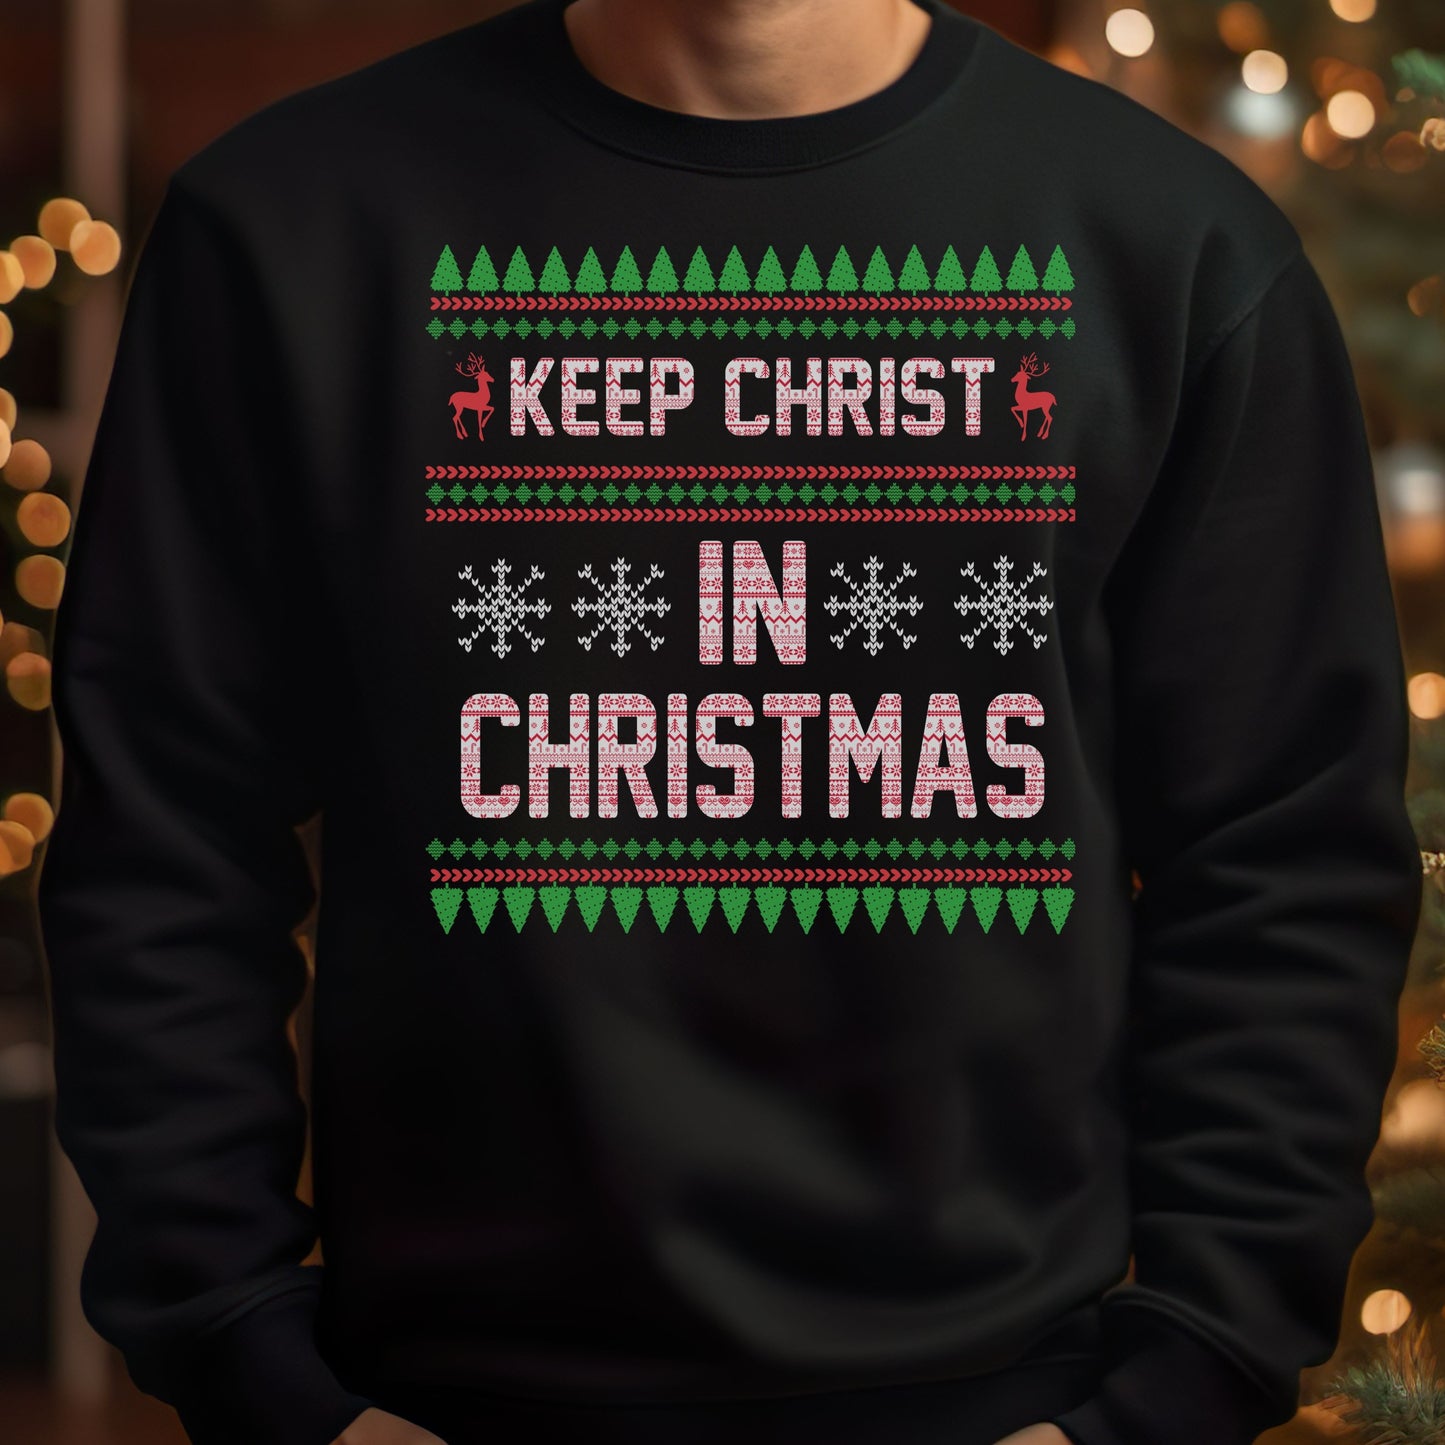 Keep Christ In Christmas - Unisex Ugly Sweater, Christmas, Winter, Fall